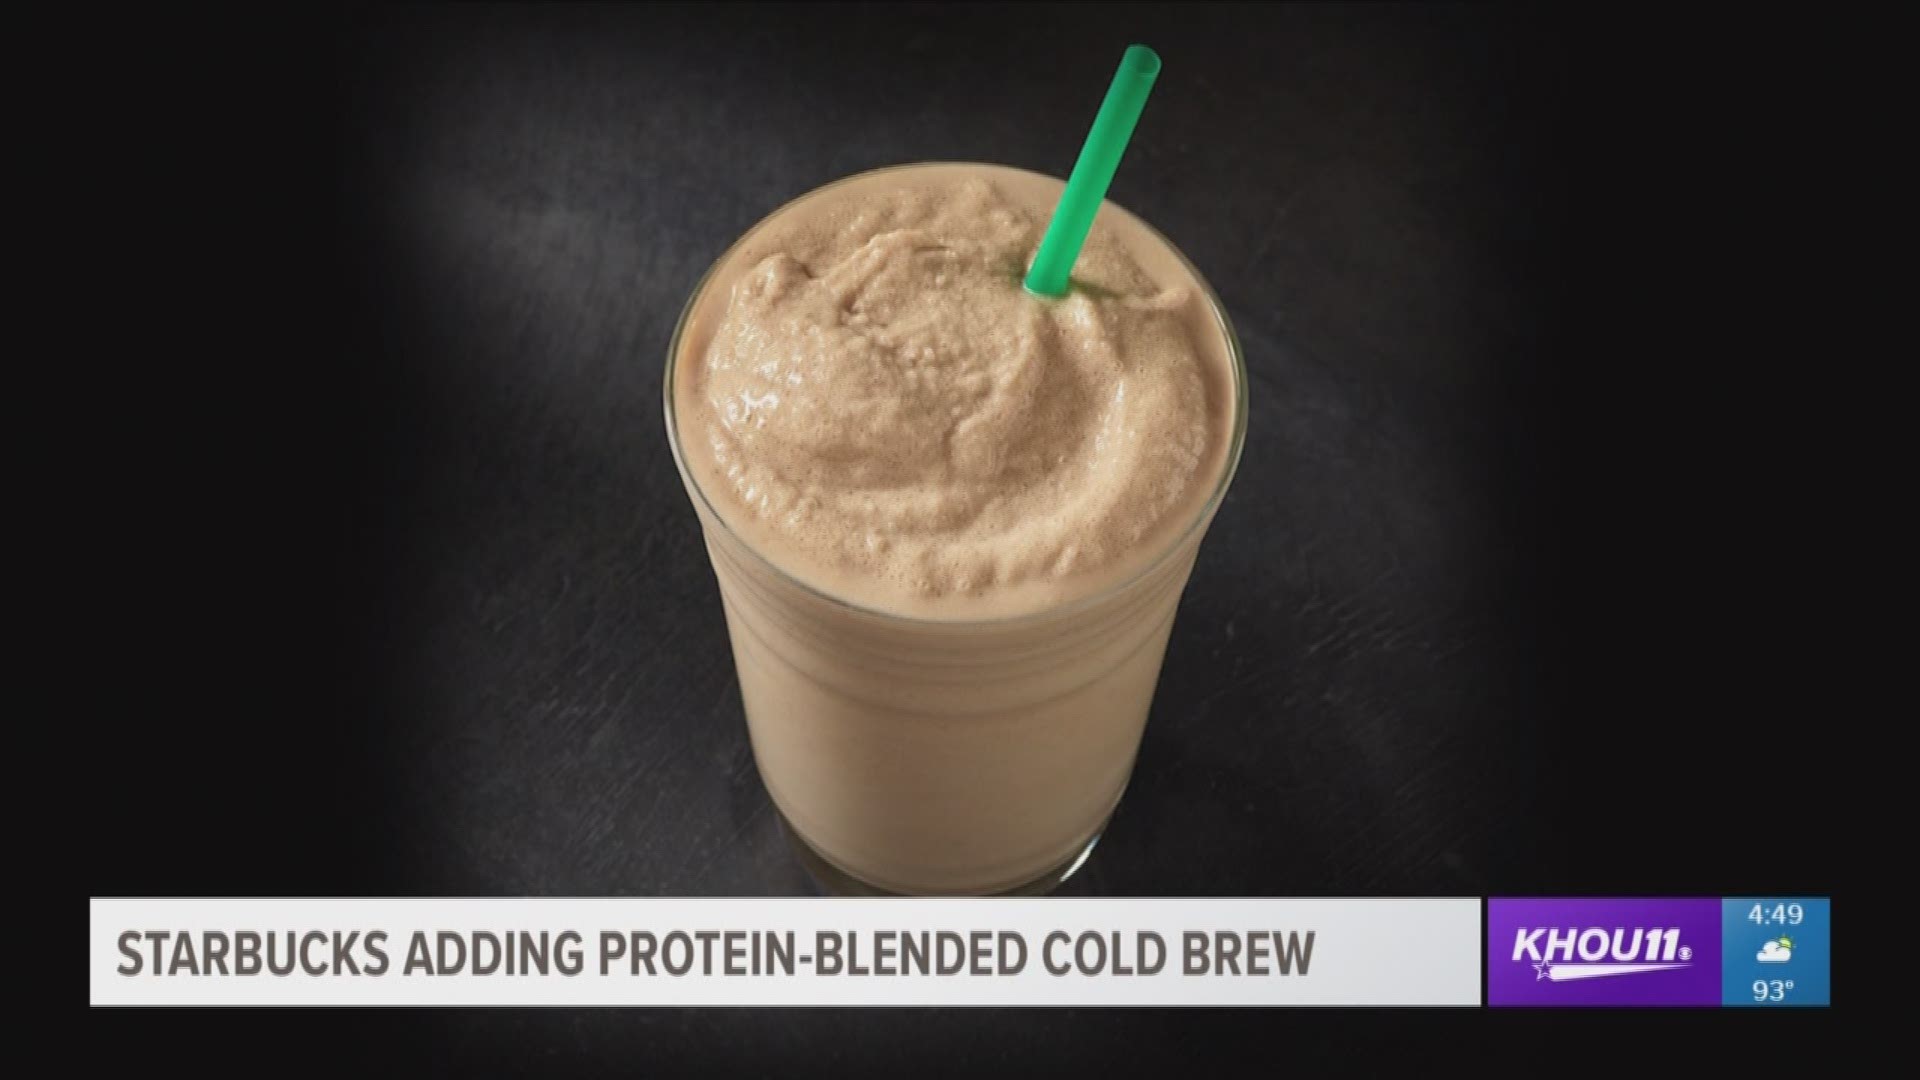 The coffee giant has now added protein-blended drinks to their menu! The drinks are vegan-friendly, made with pea and brown rice protein, and come in "almond or cacao" flavors. 